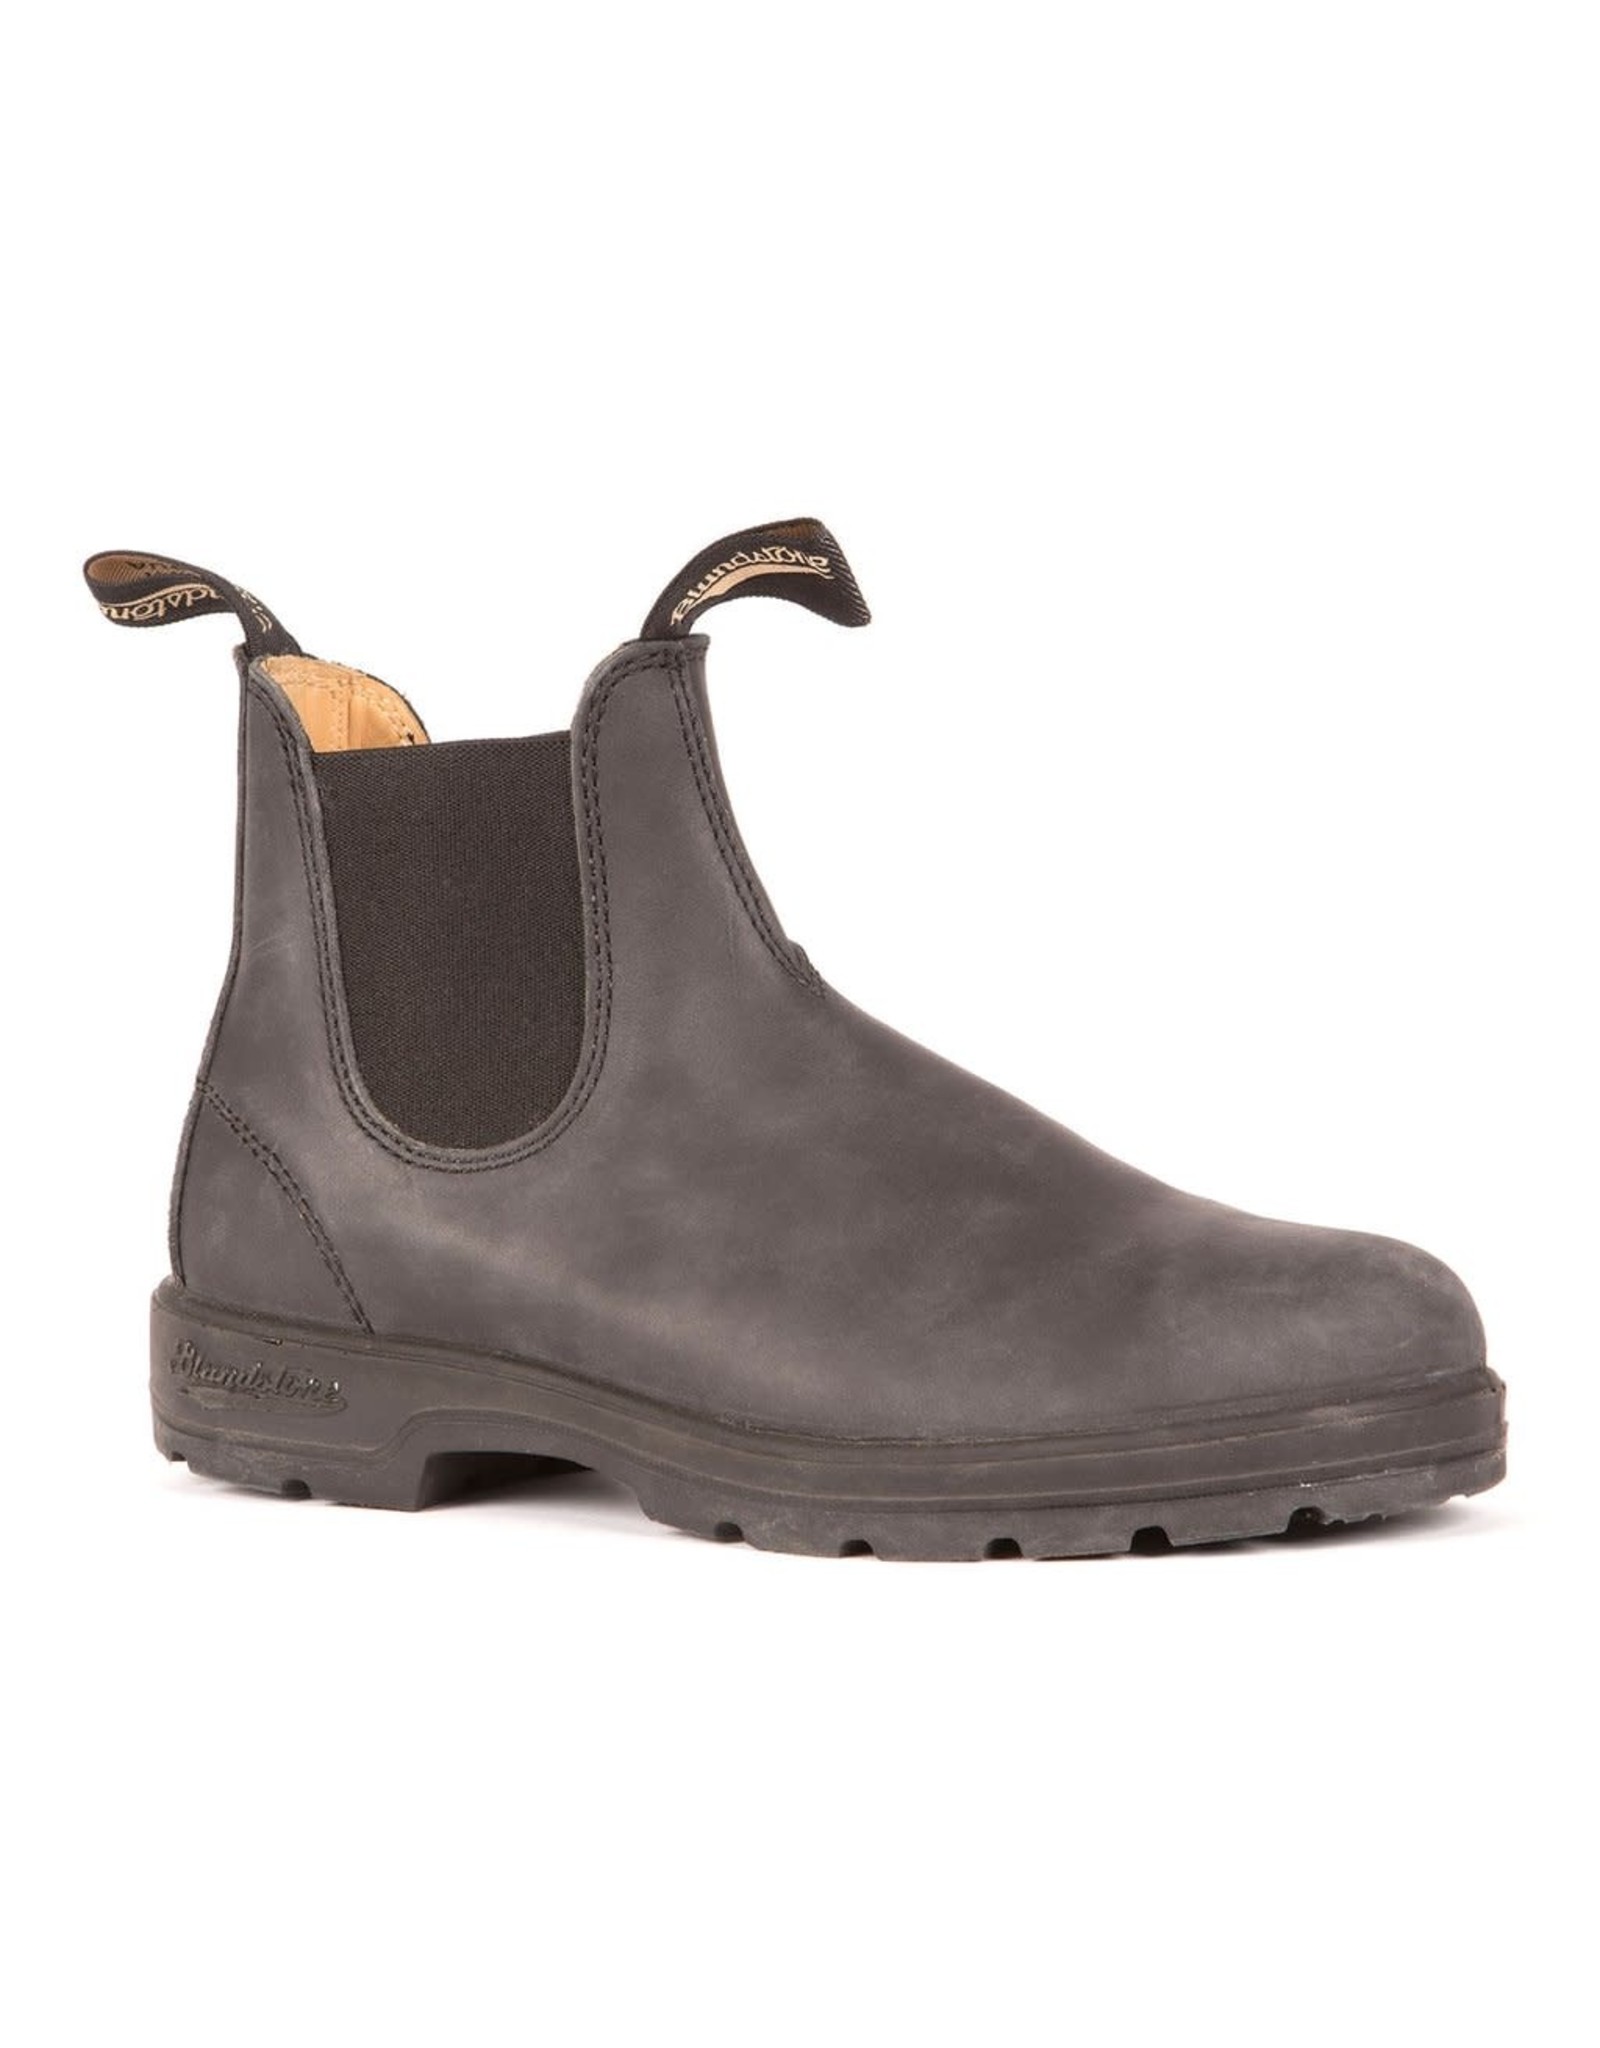 Blundstone Blundstone 587 (leather lined classic rustic black)